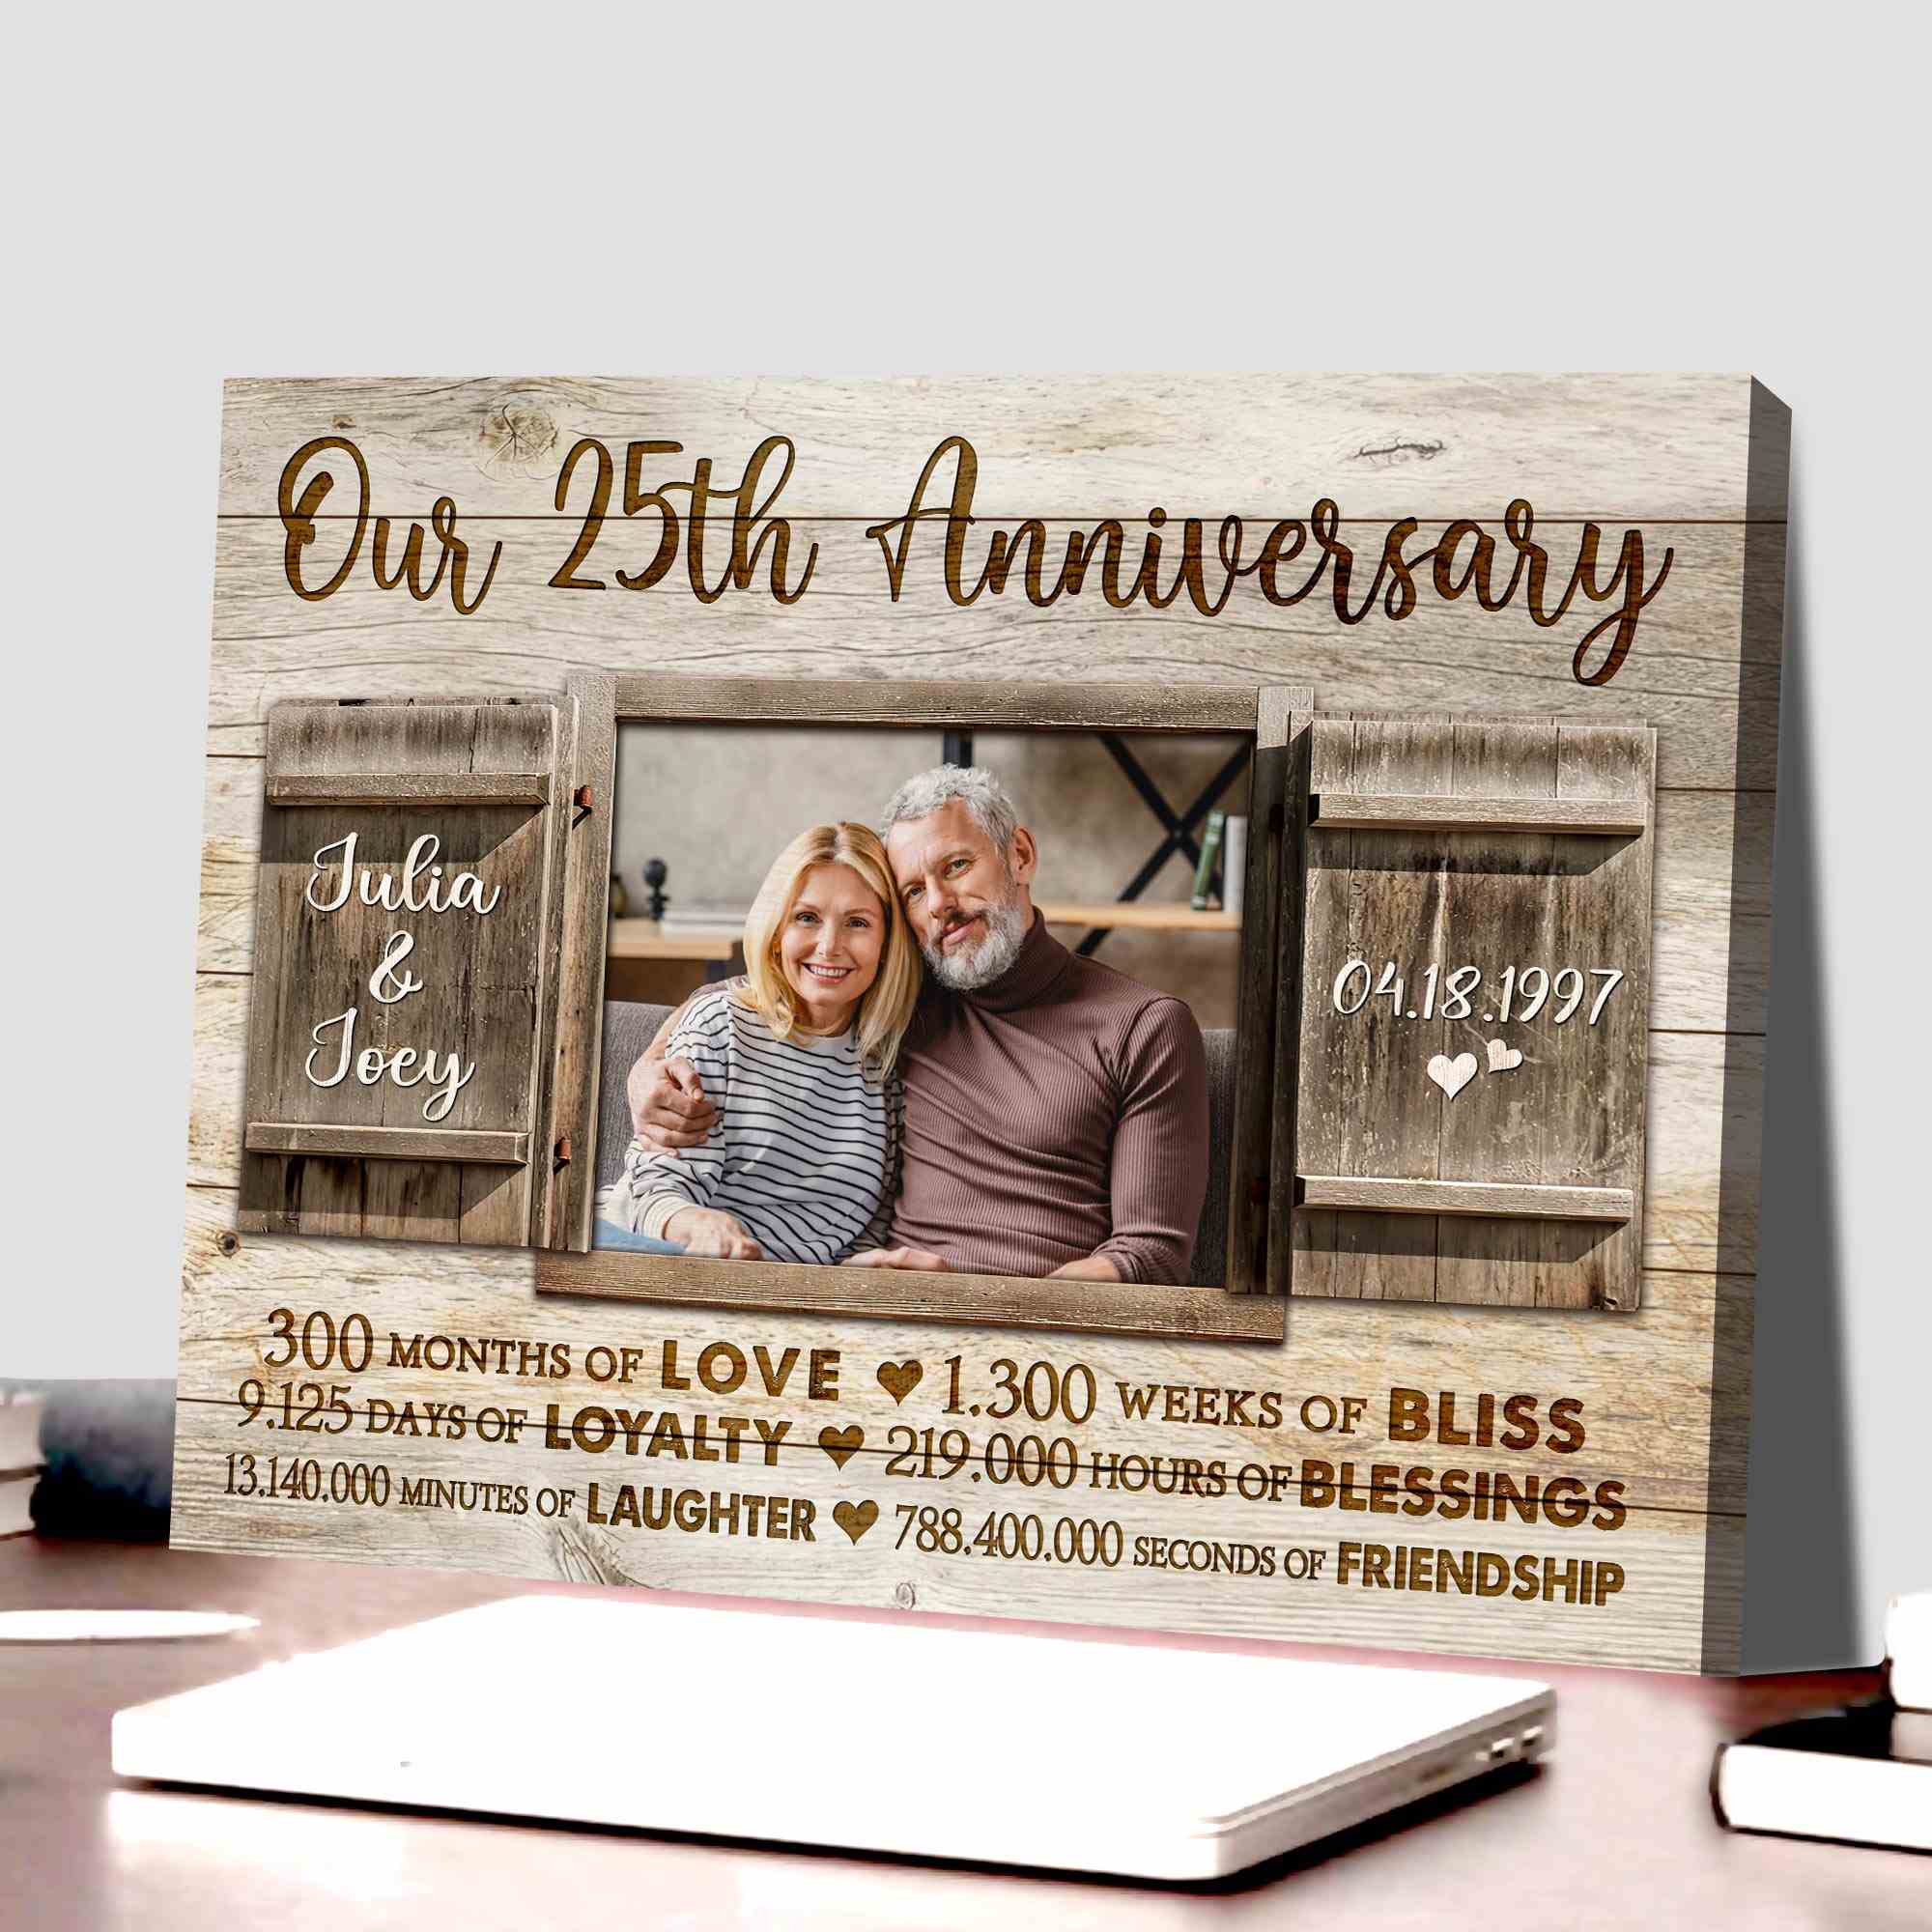 Alwaysgift Happy Anniversary Wishes Greeting Card For Wife,Girlfriend  Romantic Marriage Anniversary Gift for Wife Special : Amazon.in: Office  Products